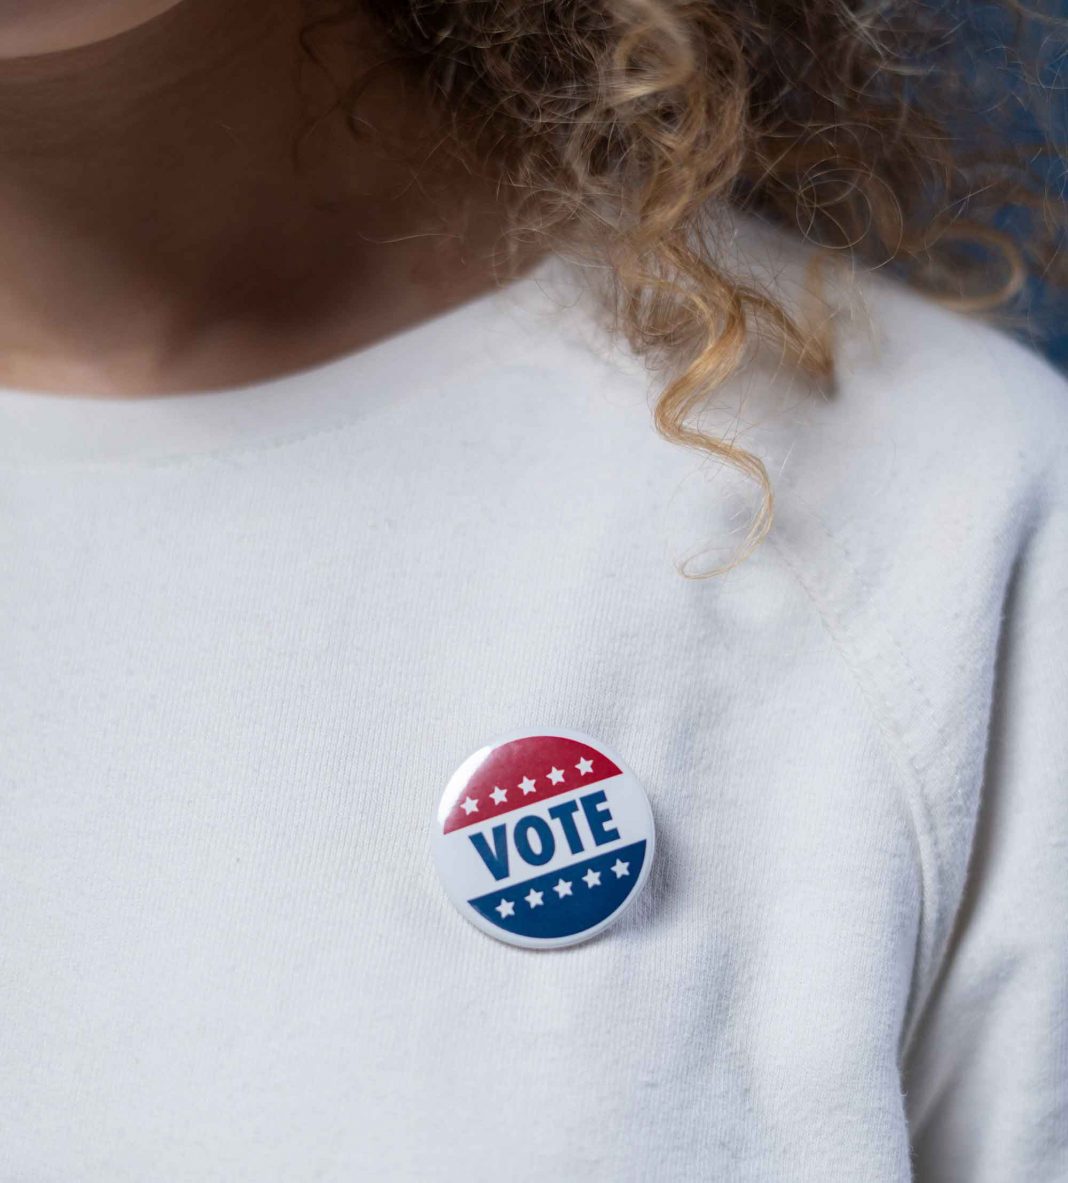 vote button on woman wearing white sweatshirt, with curly hair